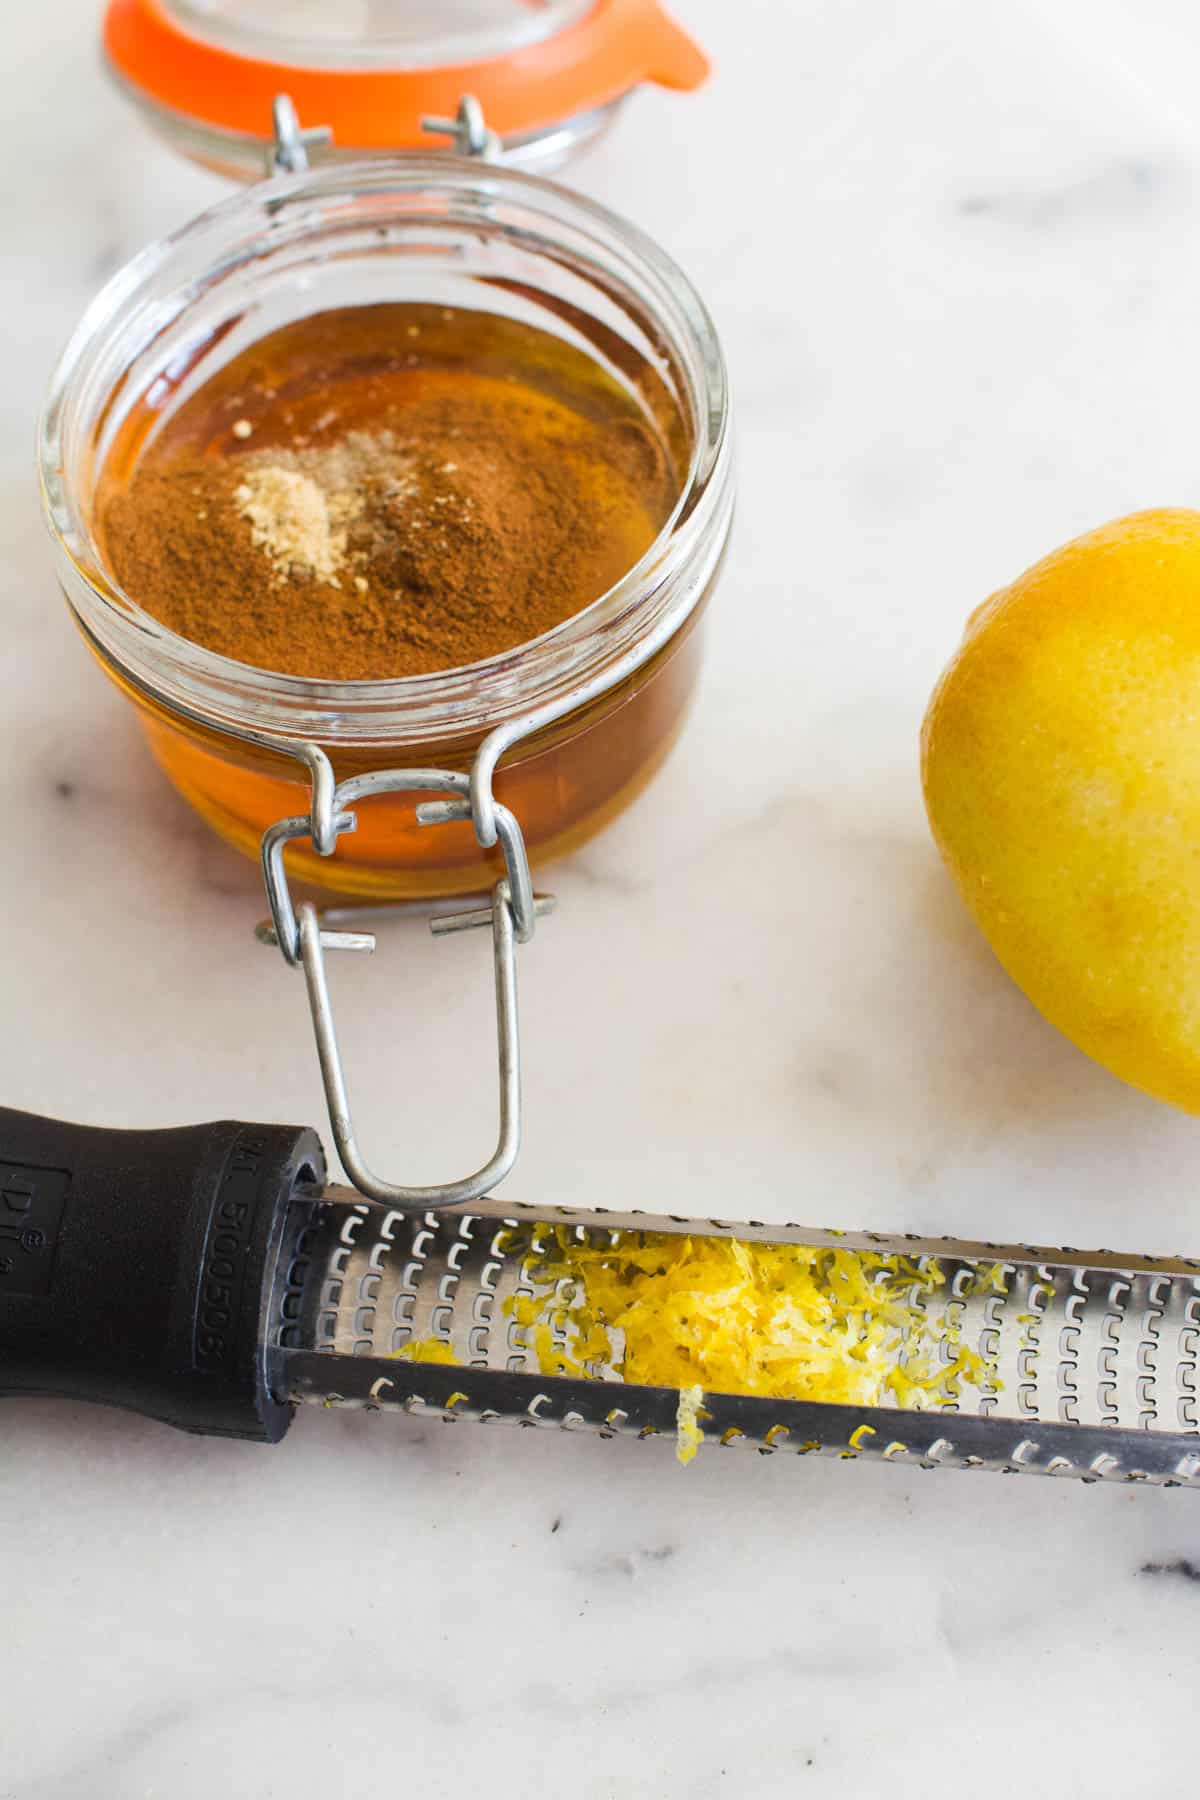 A small jar of honey next to a lemon and a zester tool with lemon zest on it.